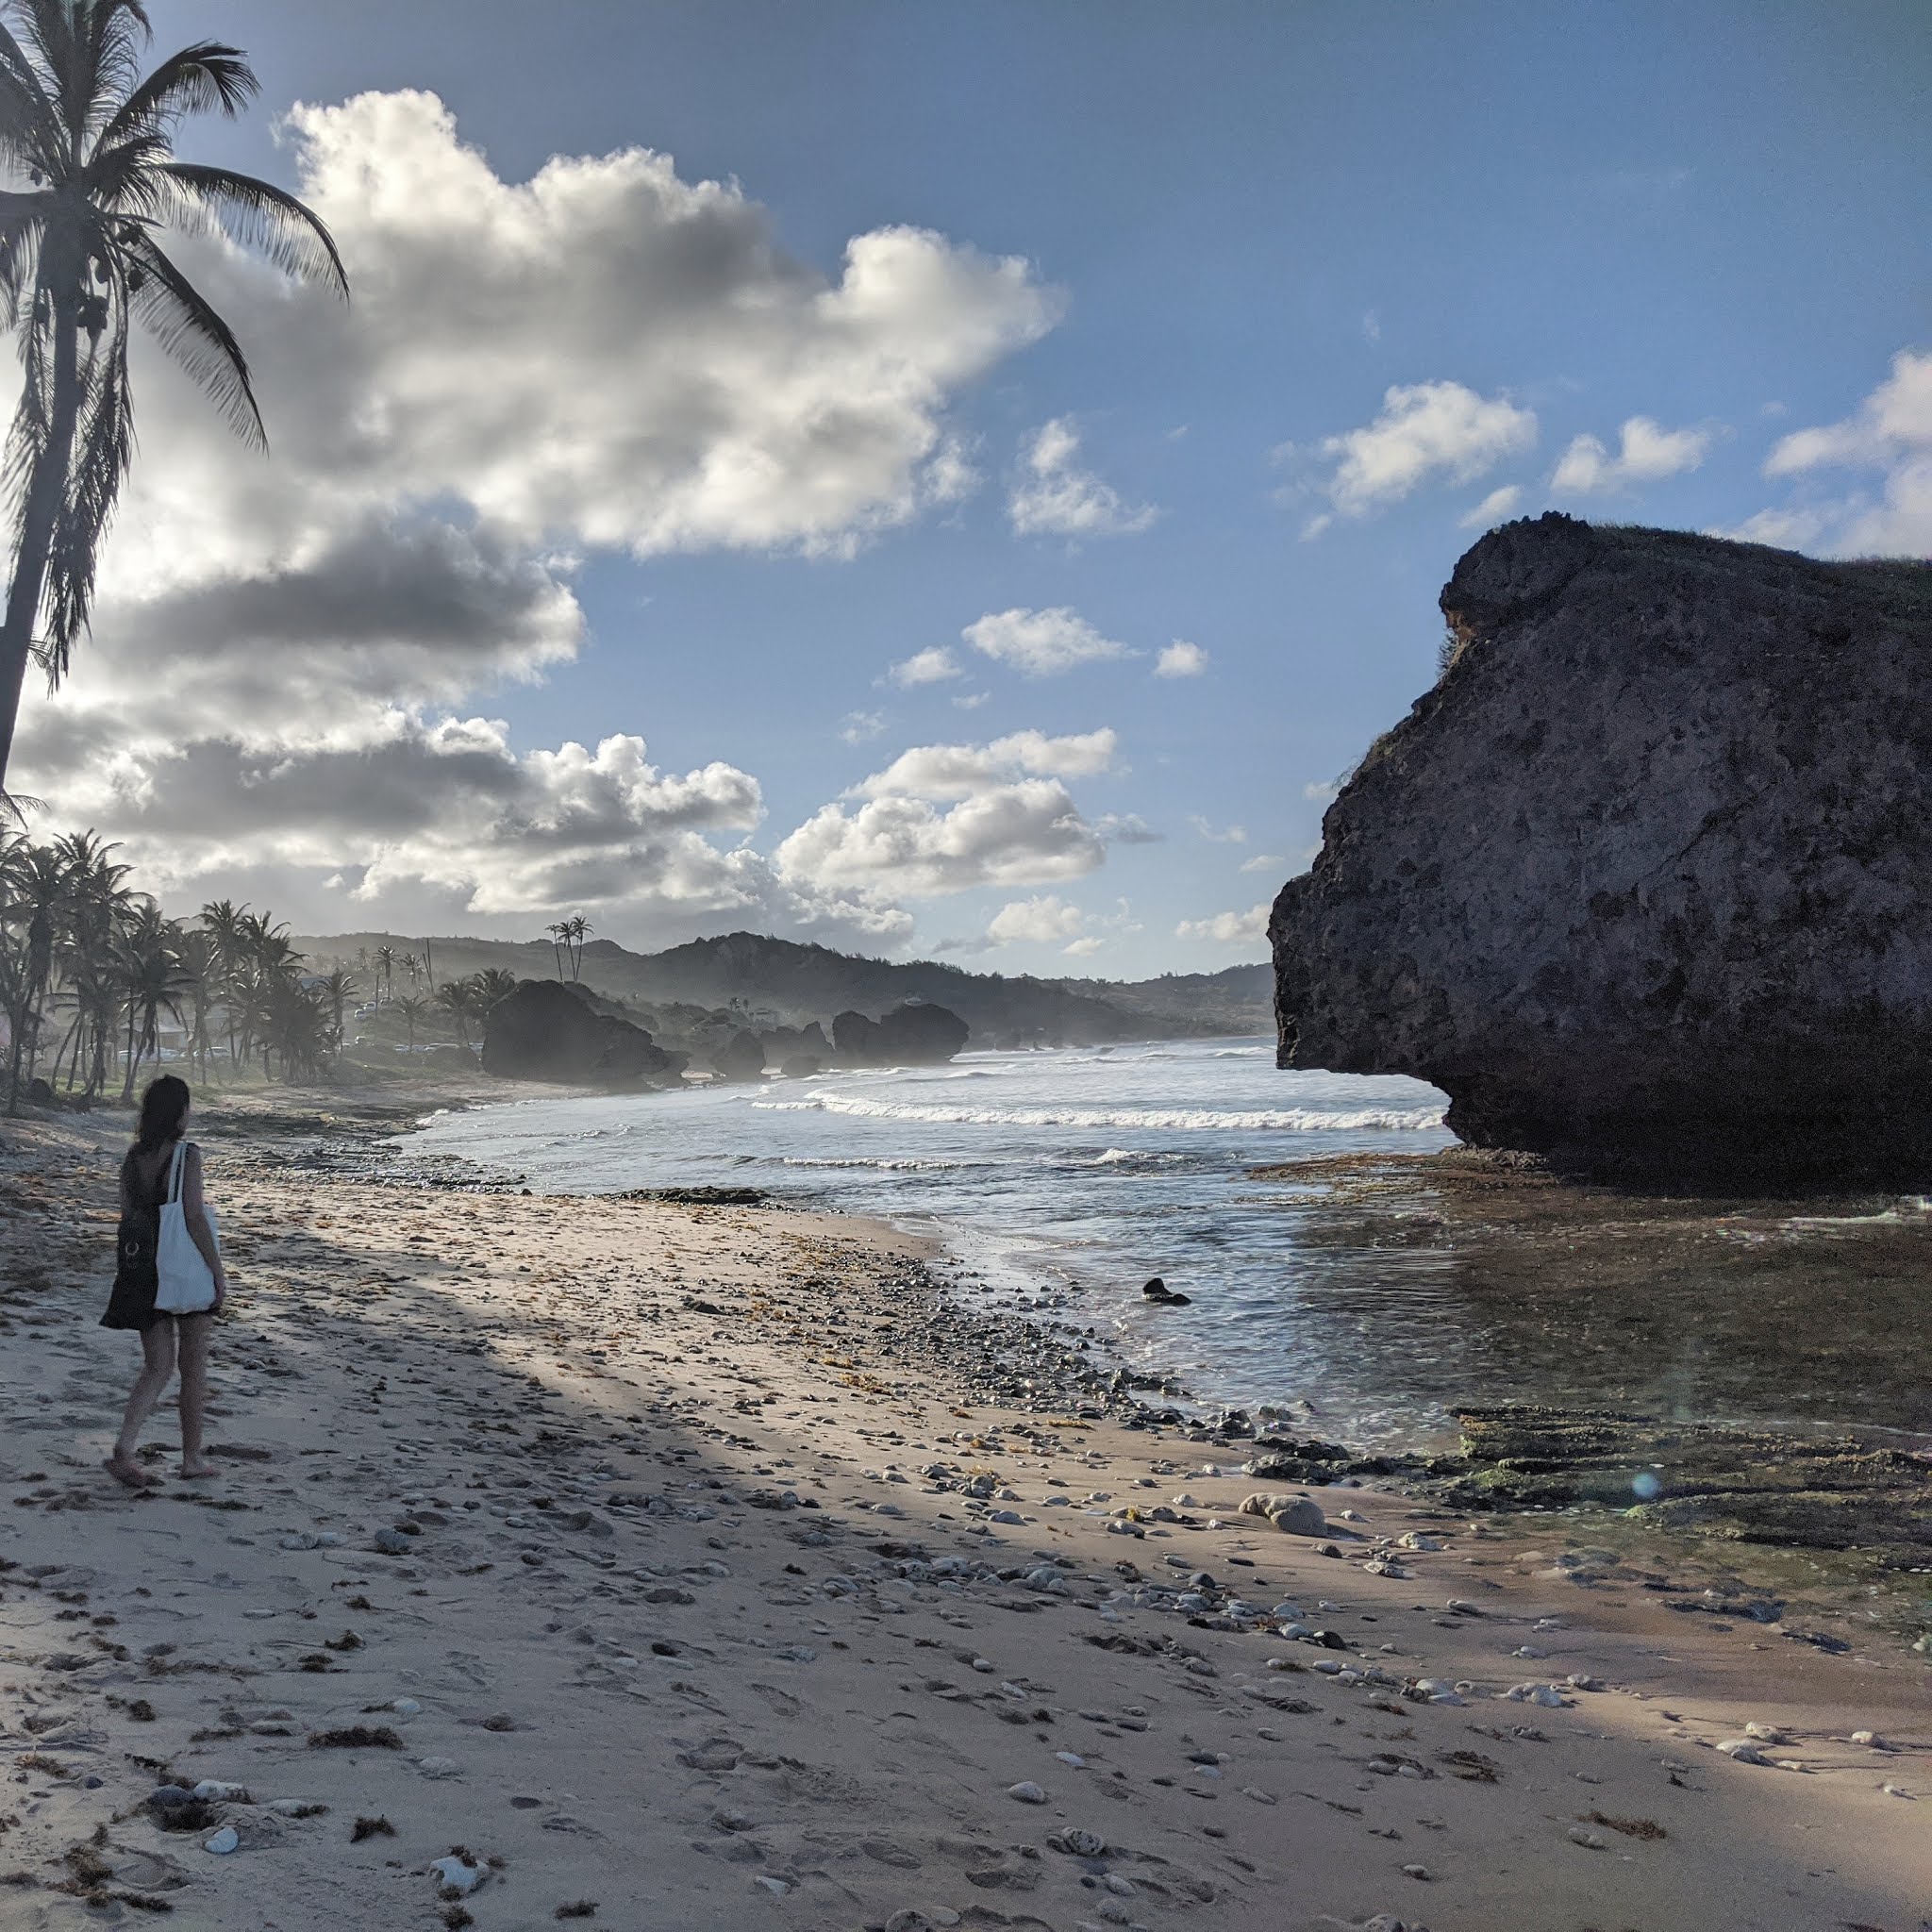 Lydia Swinscoe walks past huge coral boulders on the beach in Bathsheba, one of the most incredible beaches in Barbados